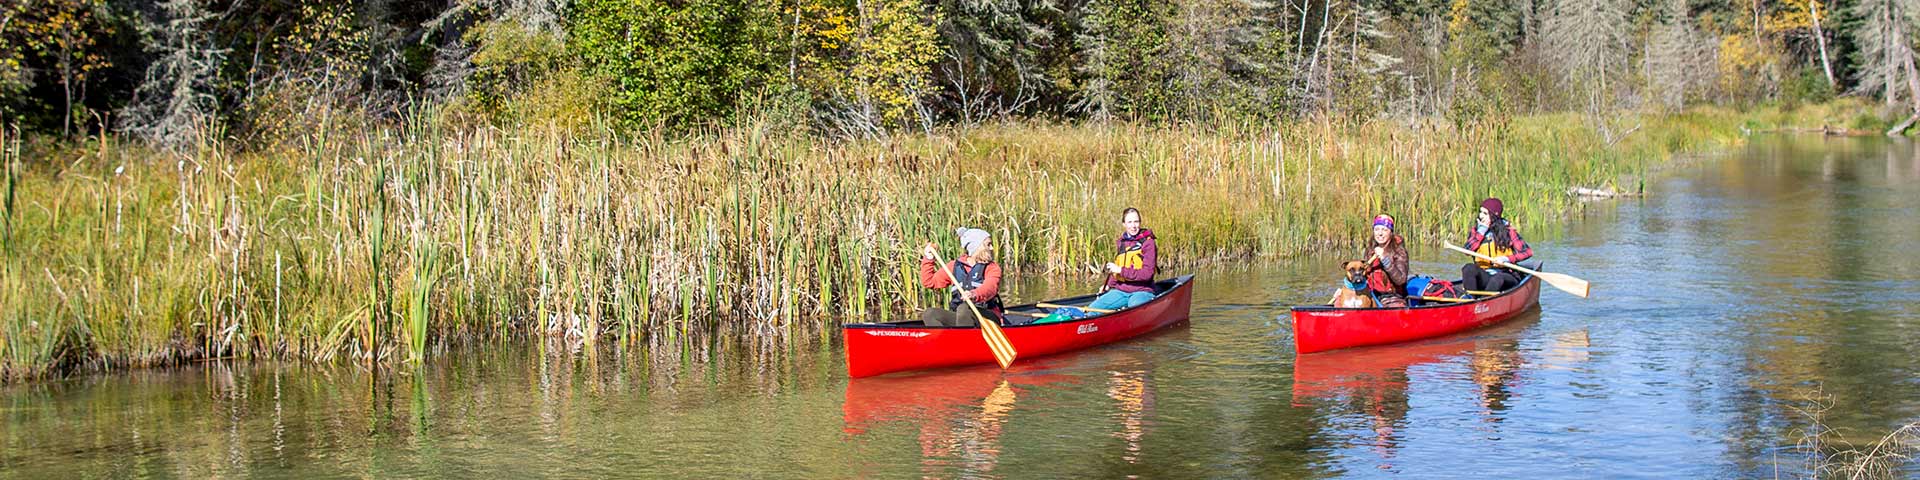  A group of young adult women on a canoe adventure on the Kingsmere River headed towards Kingsmere Lake in the Kingsmere Wilderness Area in Prince Albert National Park.